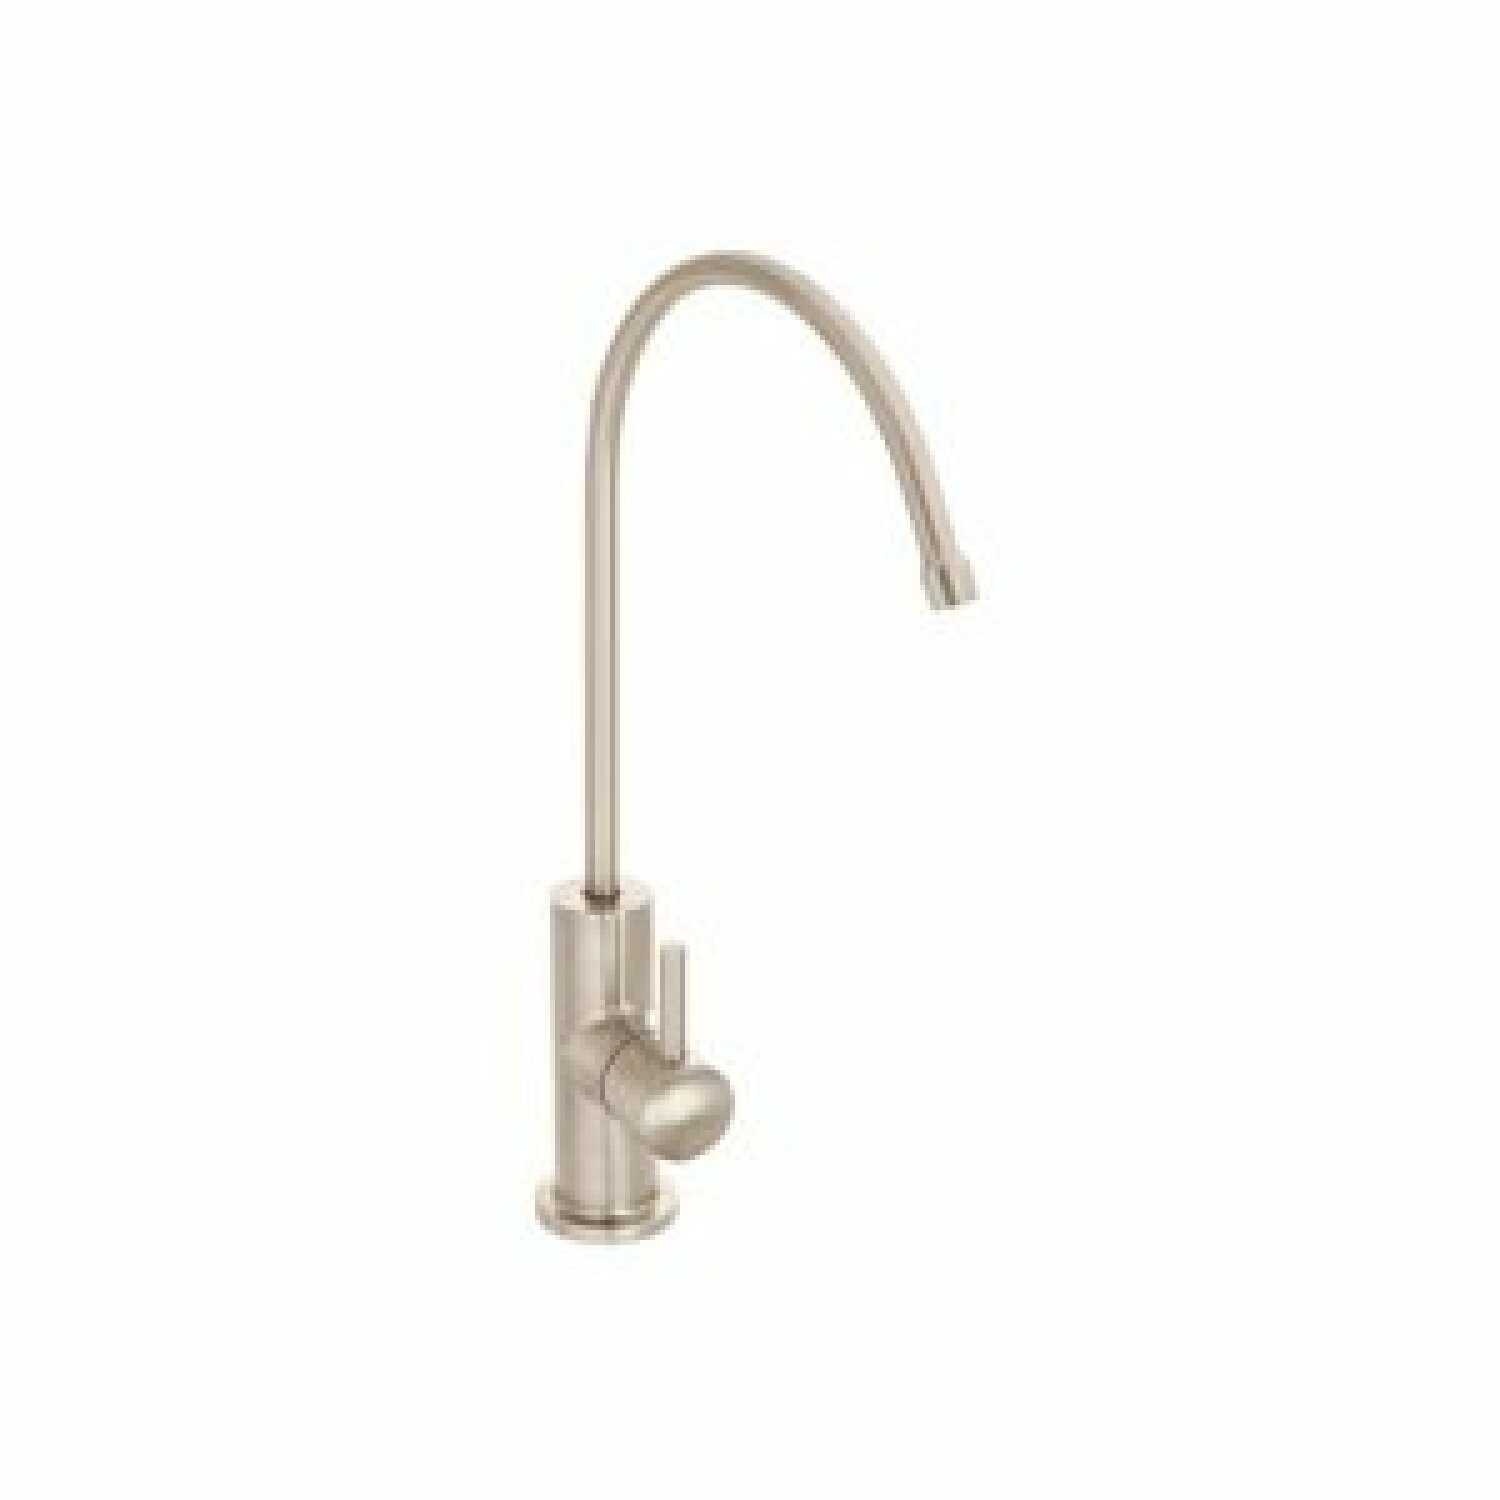 <a href="https://amzn.to/2pVtD9e" target="_blank" rel="noopener nofollow noreferrer">Water filter faucet</a>